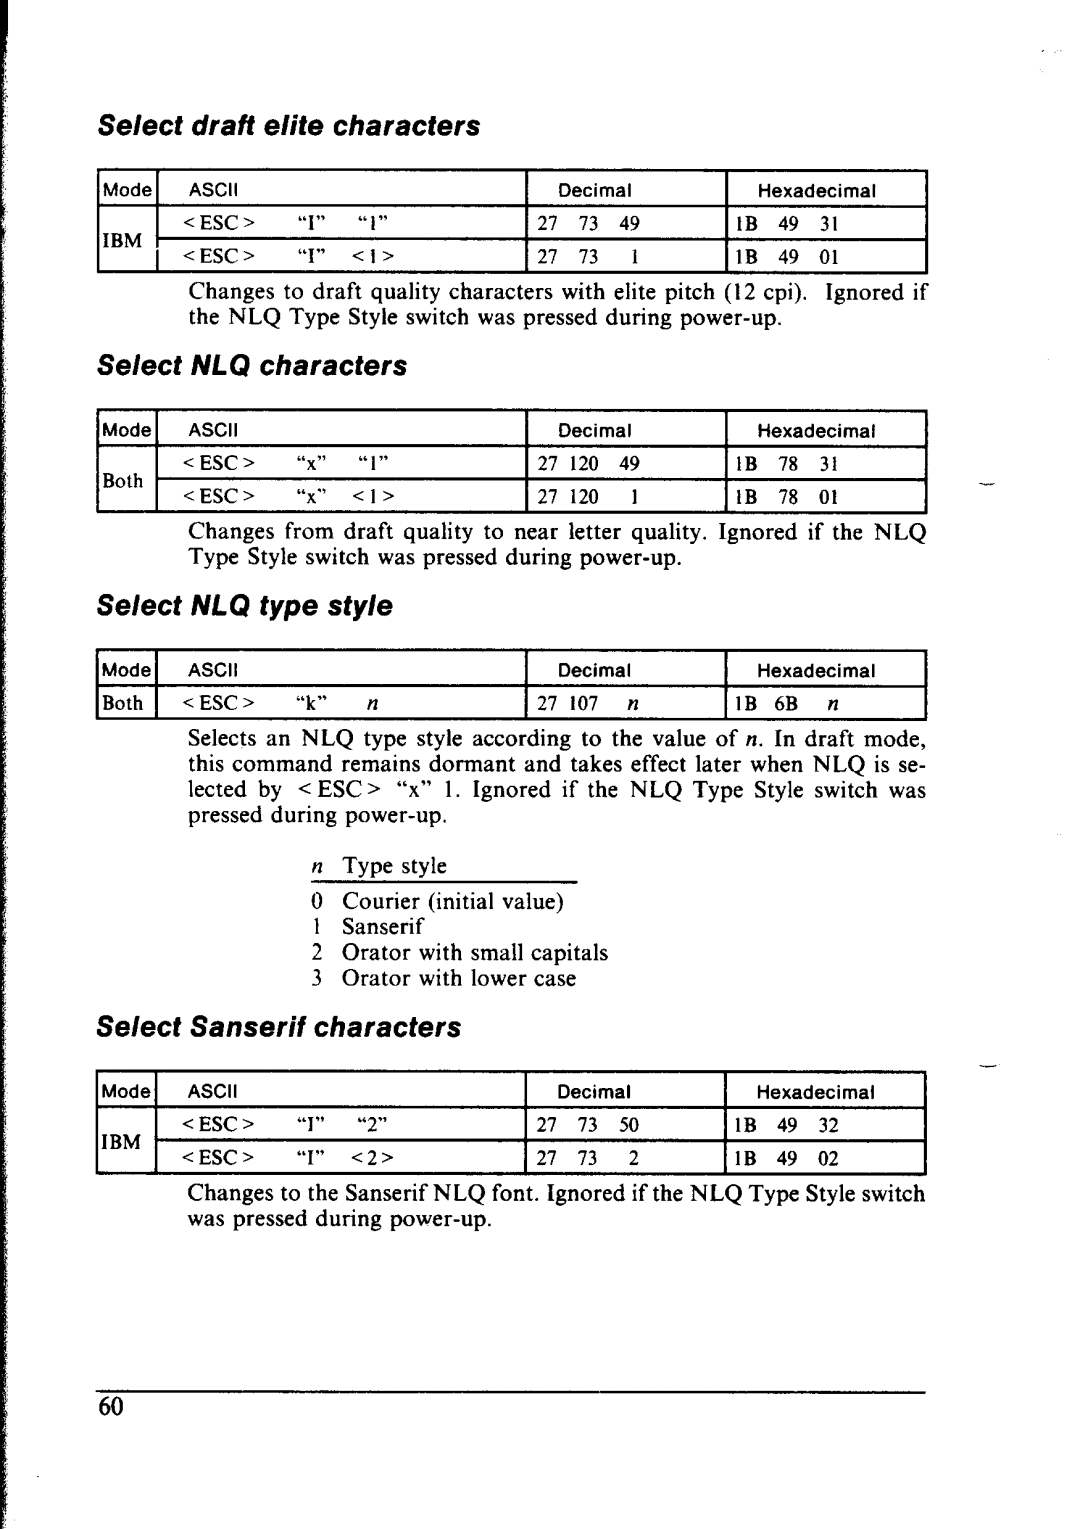 Star Micronics NX-1000 draft, elite, Select MC? characters, Select NLQ type style, Select Sanserif characters 